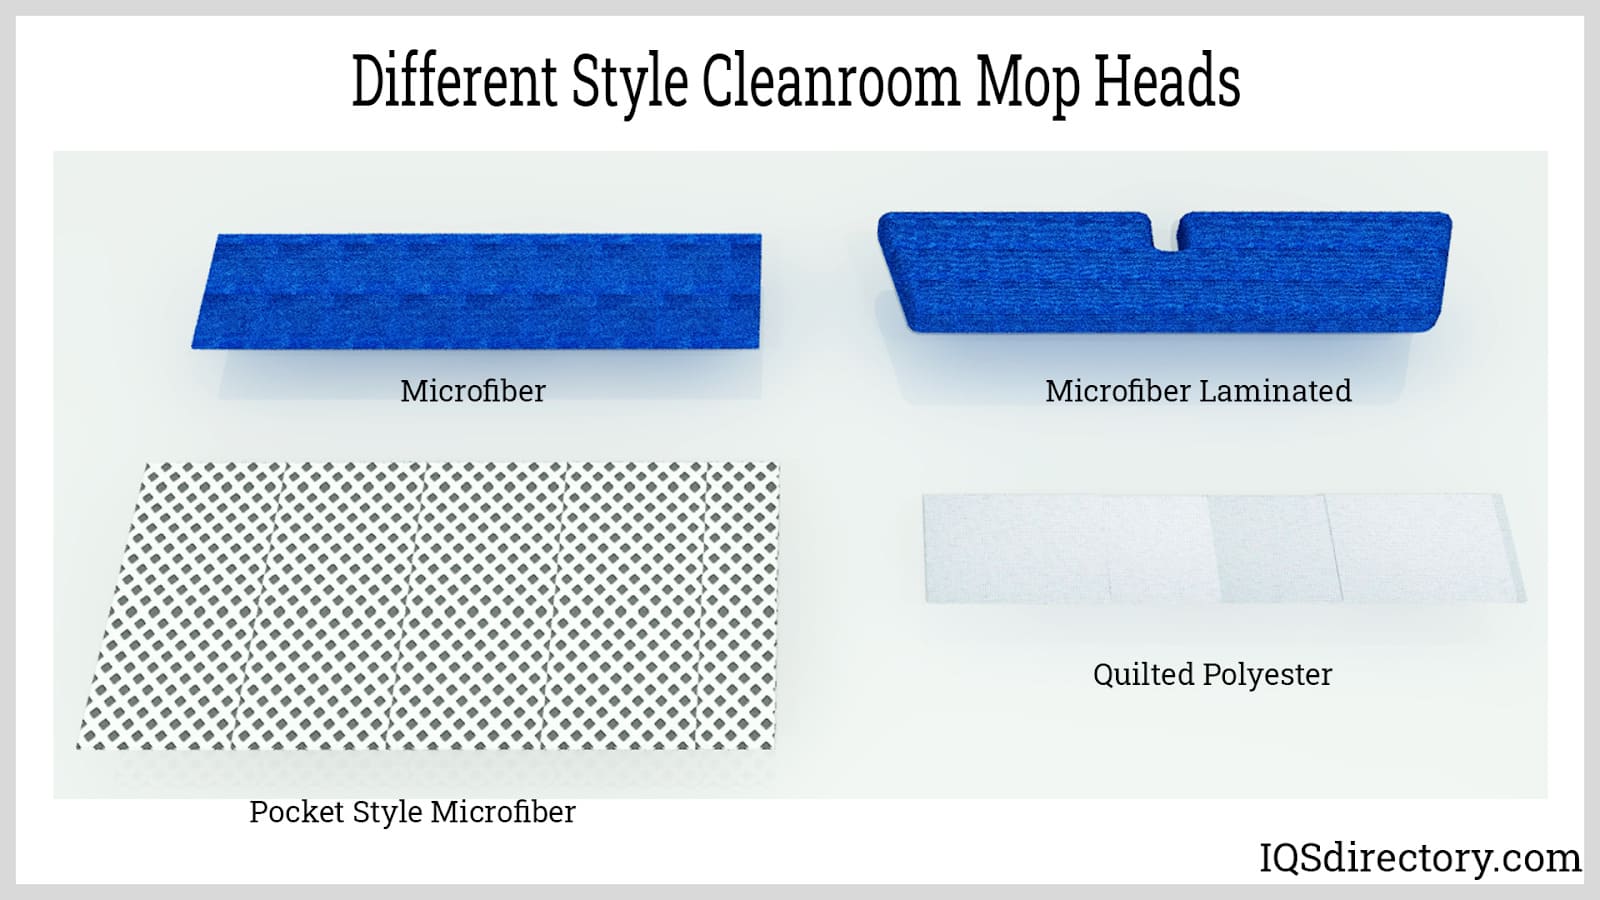 Different Style Cleanroom Mop Heads